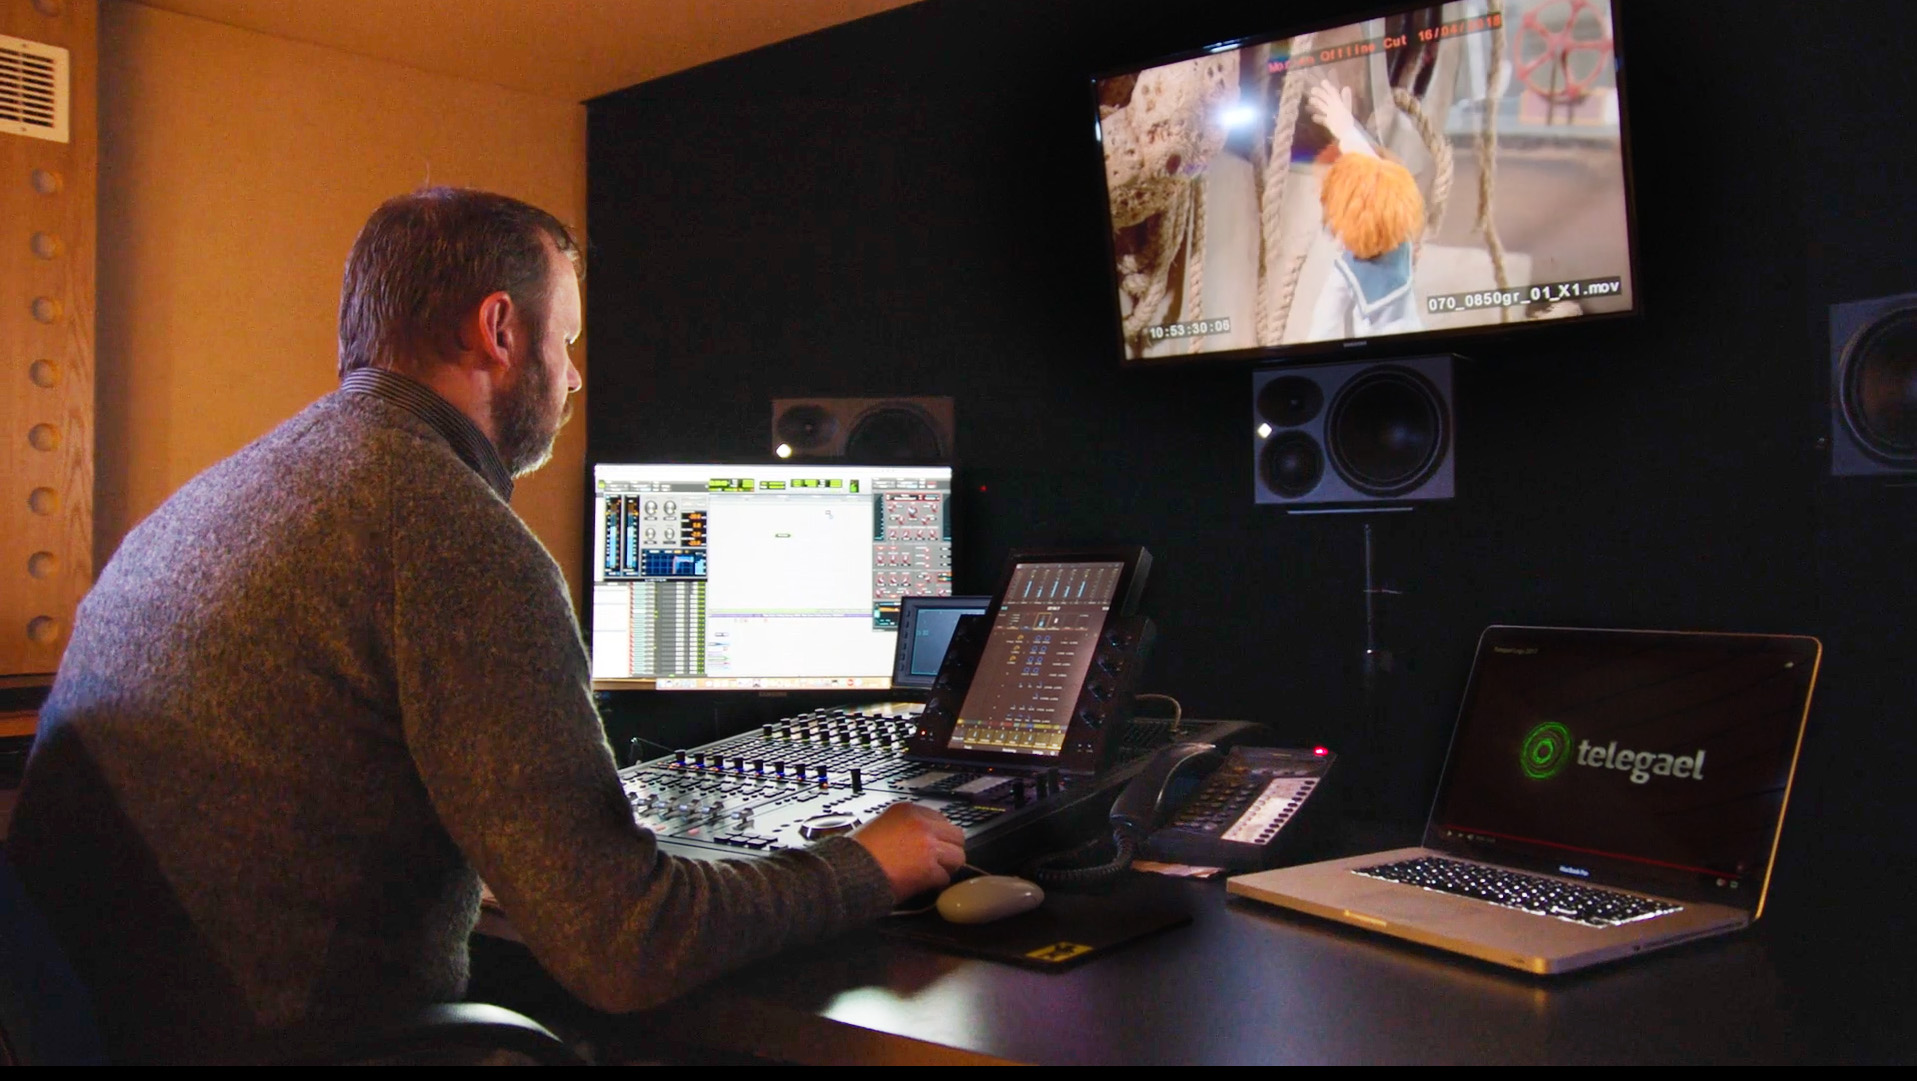 Mixing console at Parabolic Studios showing PC screen with ProTools and Cleanfeed